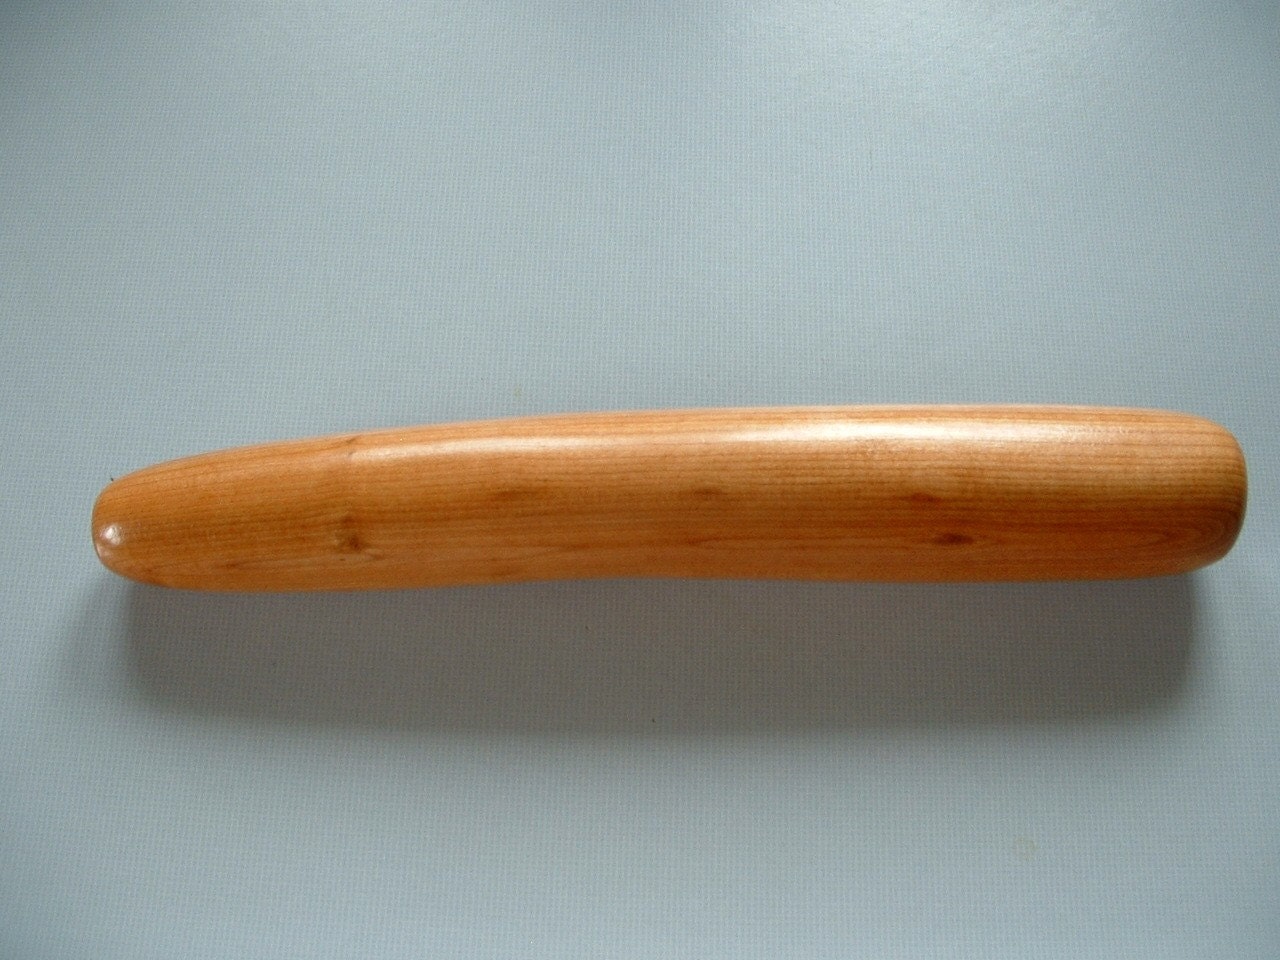 9 Inches Long Apple Wood Dildo